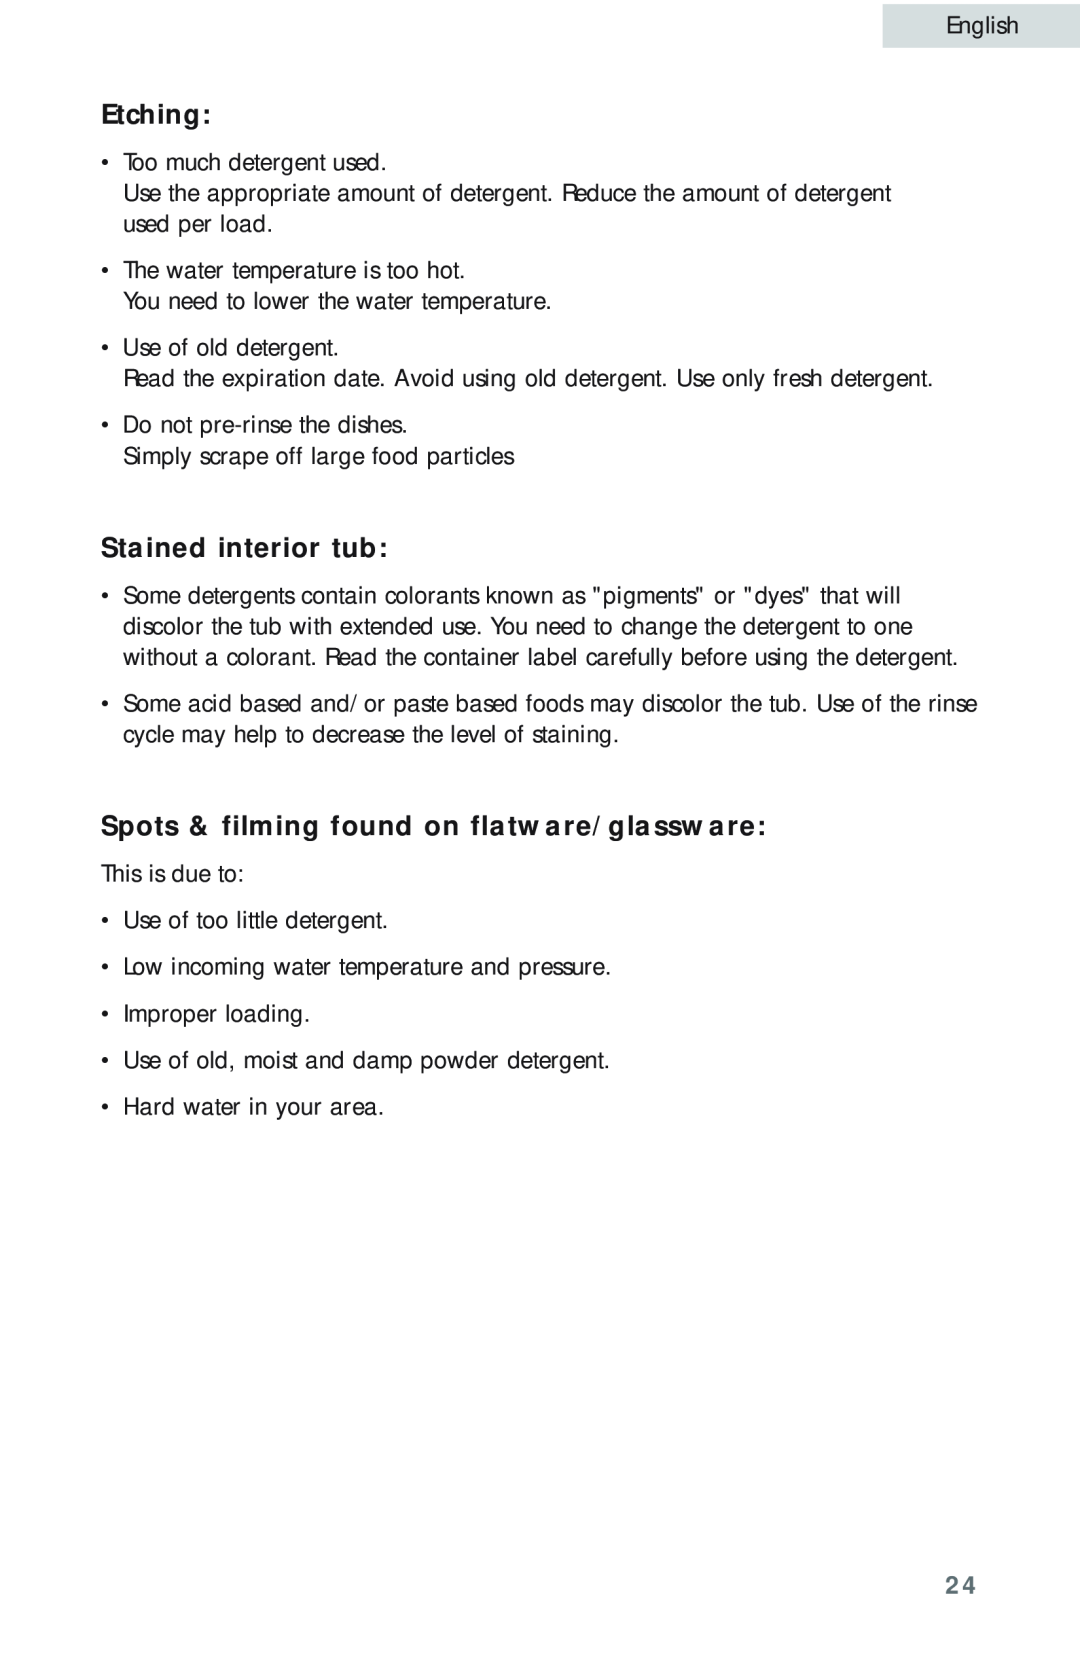 Haier HDB18EB user manual Etching, Stained interior tub, Spots & filming found on flatware/glassware 